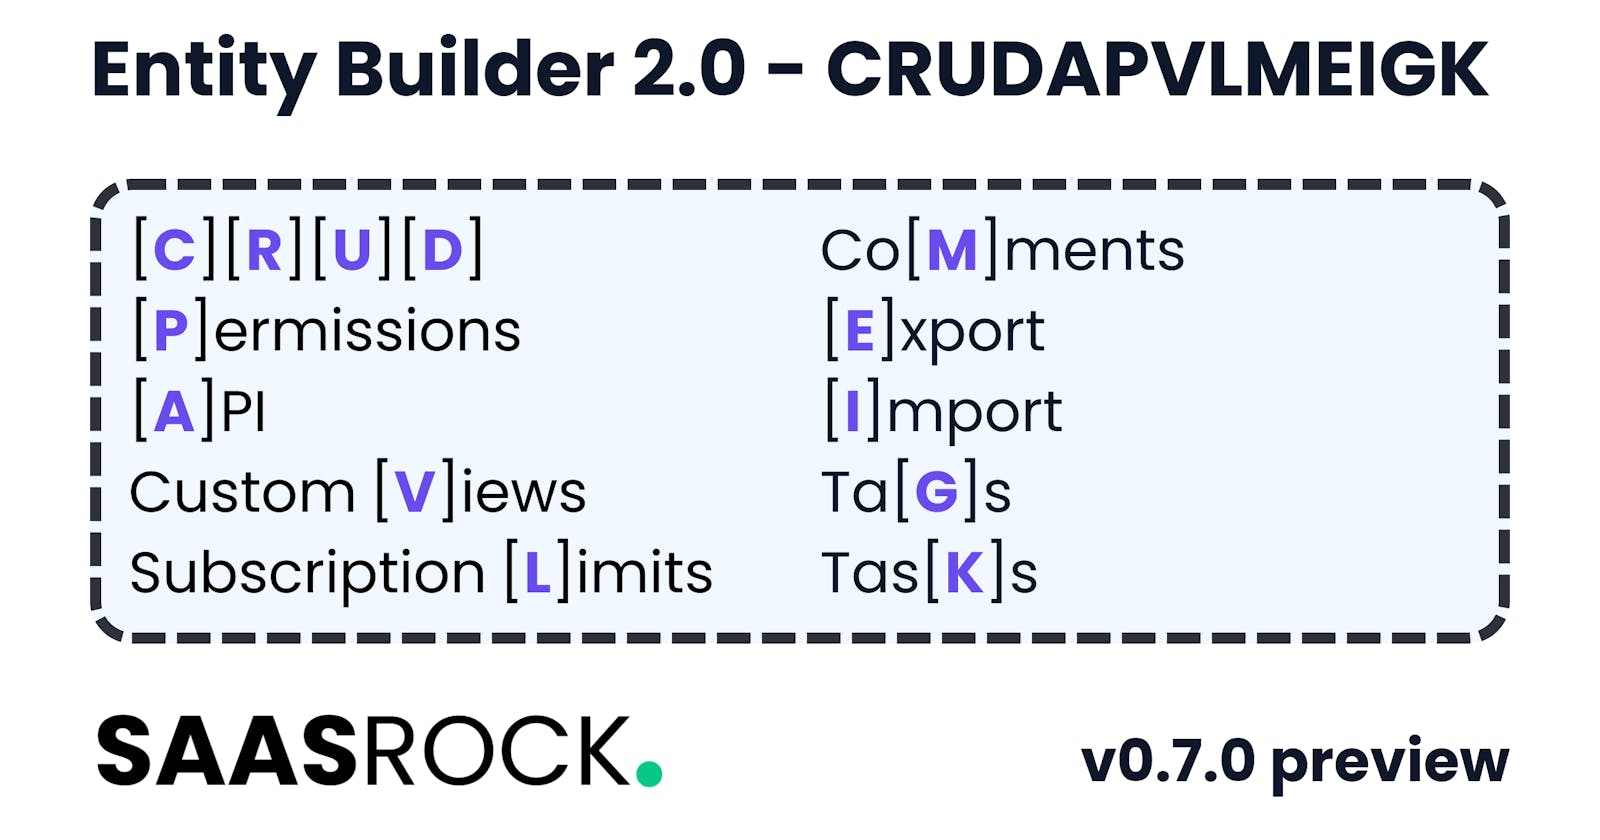 Building a Low-code CRUD on steroids for SaaS apps